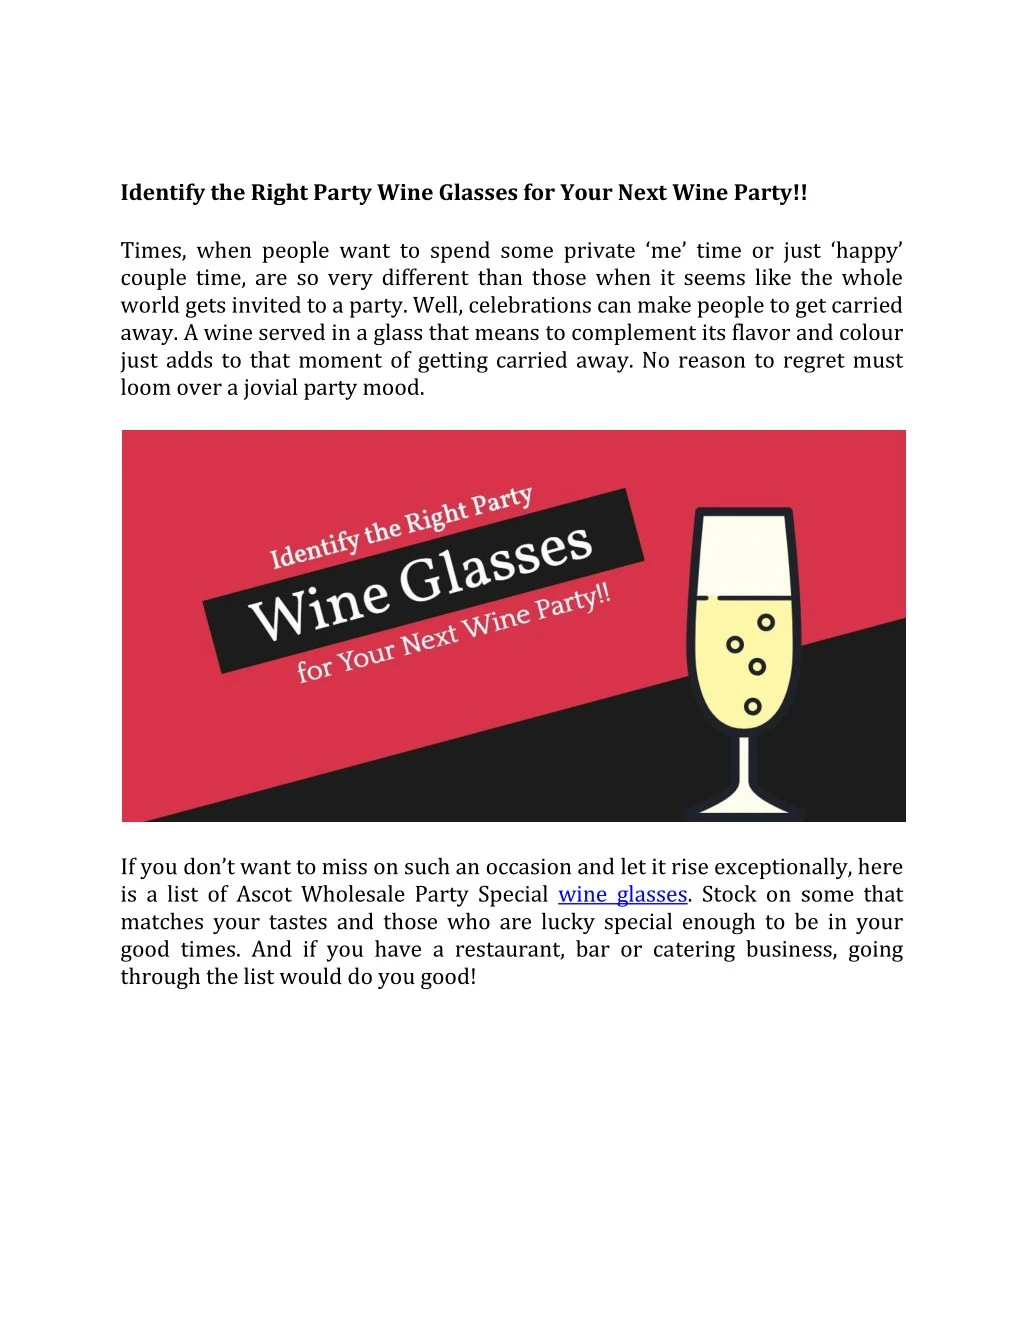 identify the right party wine glasses for your